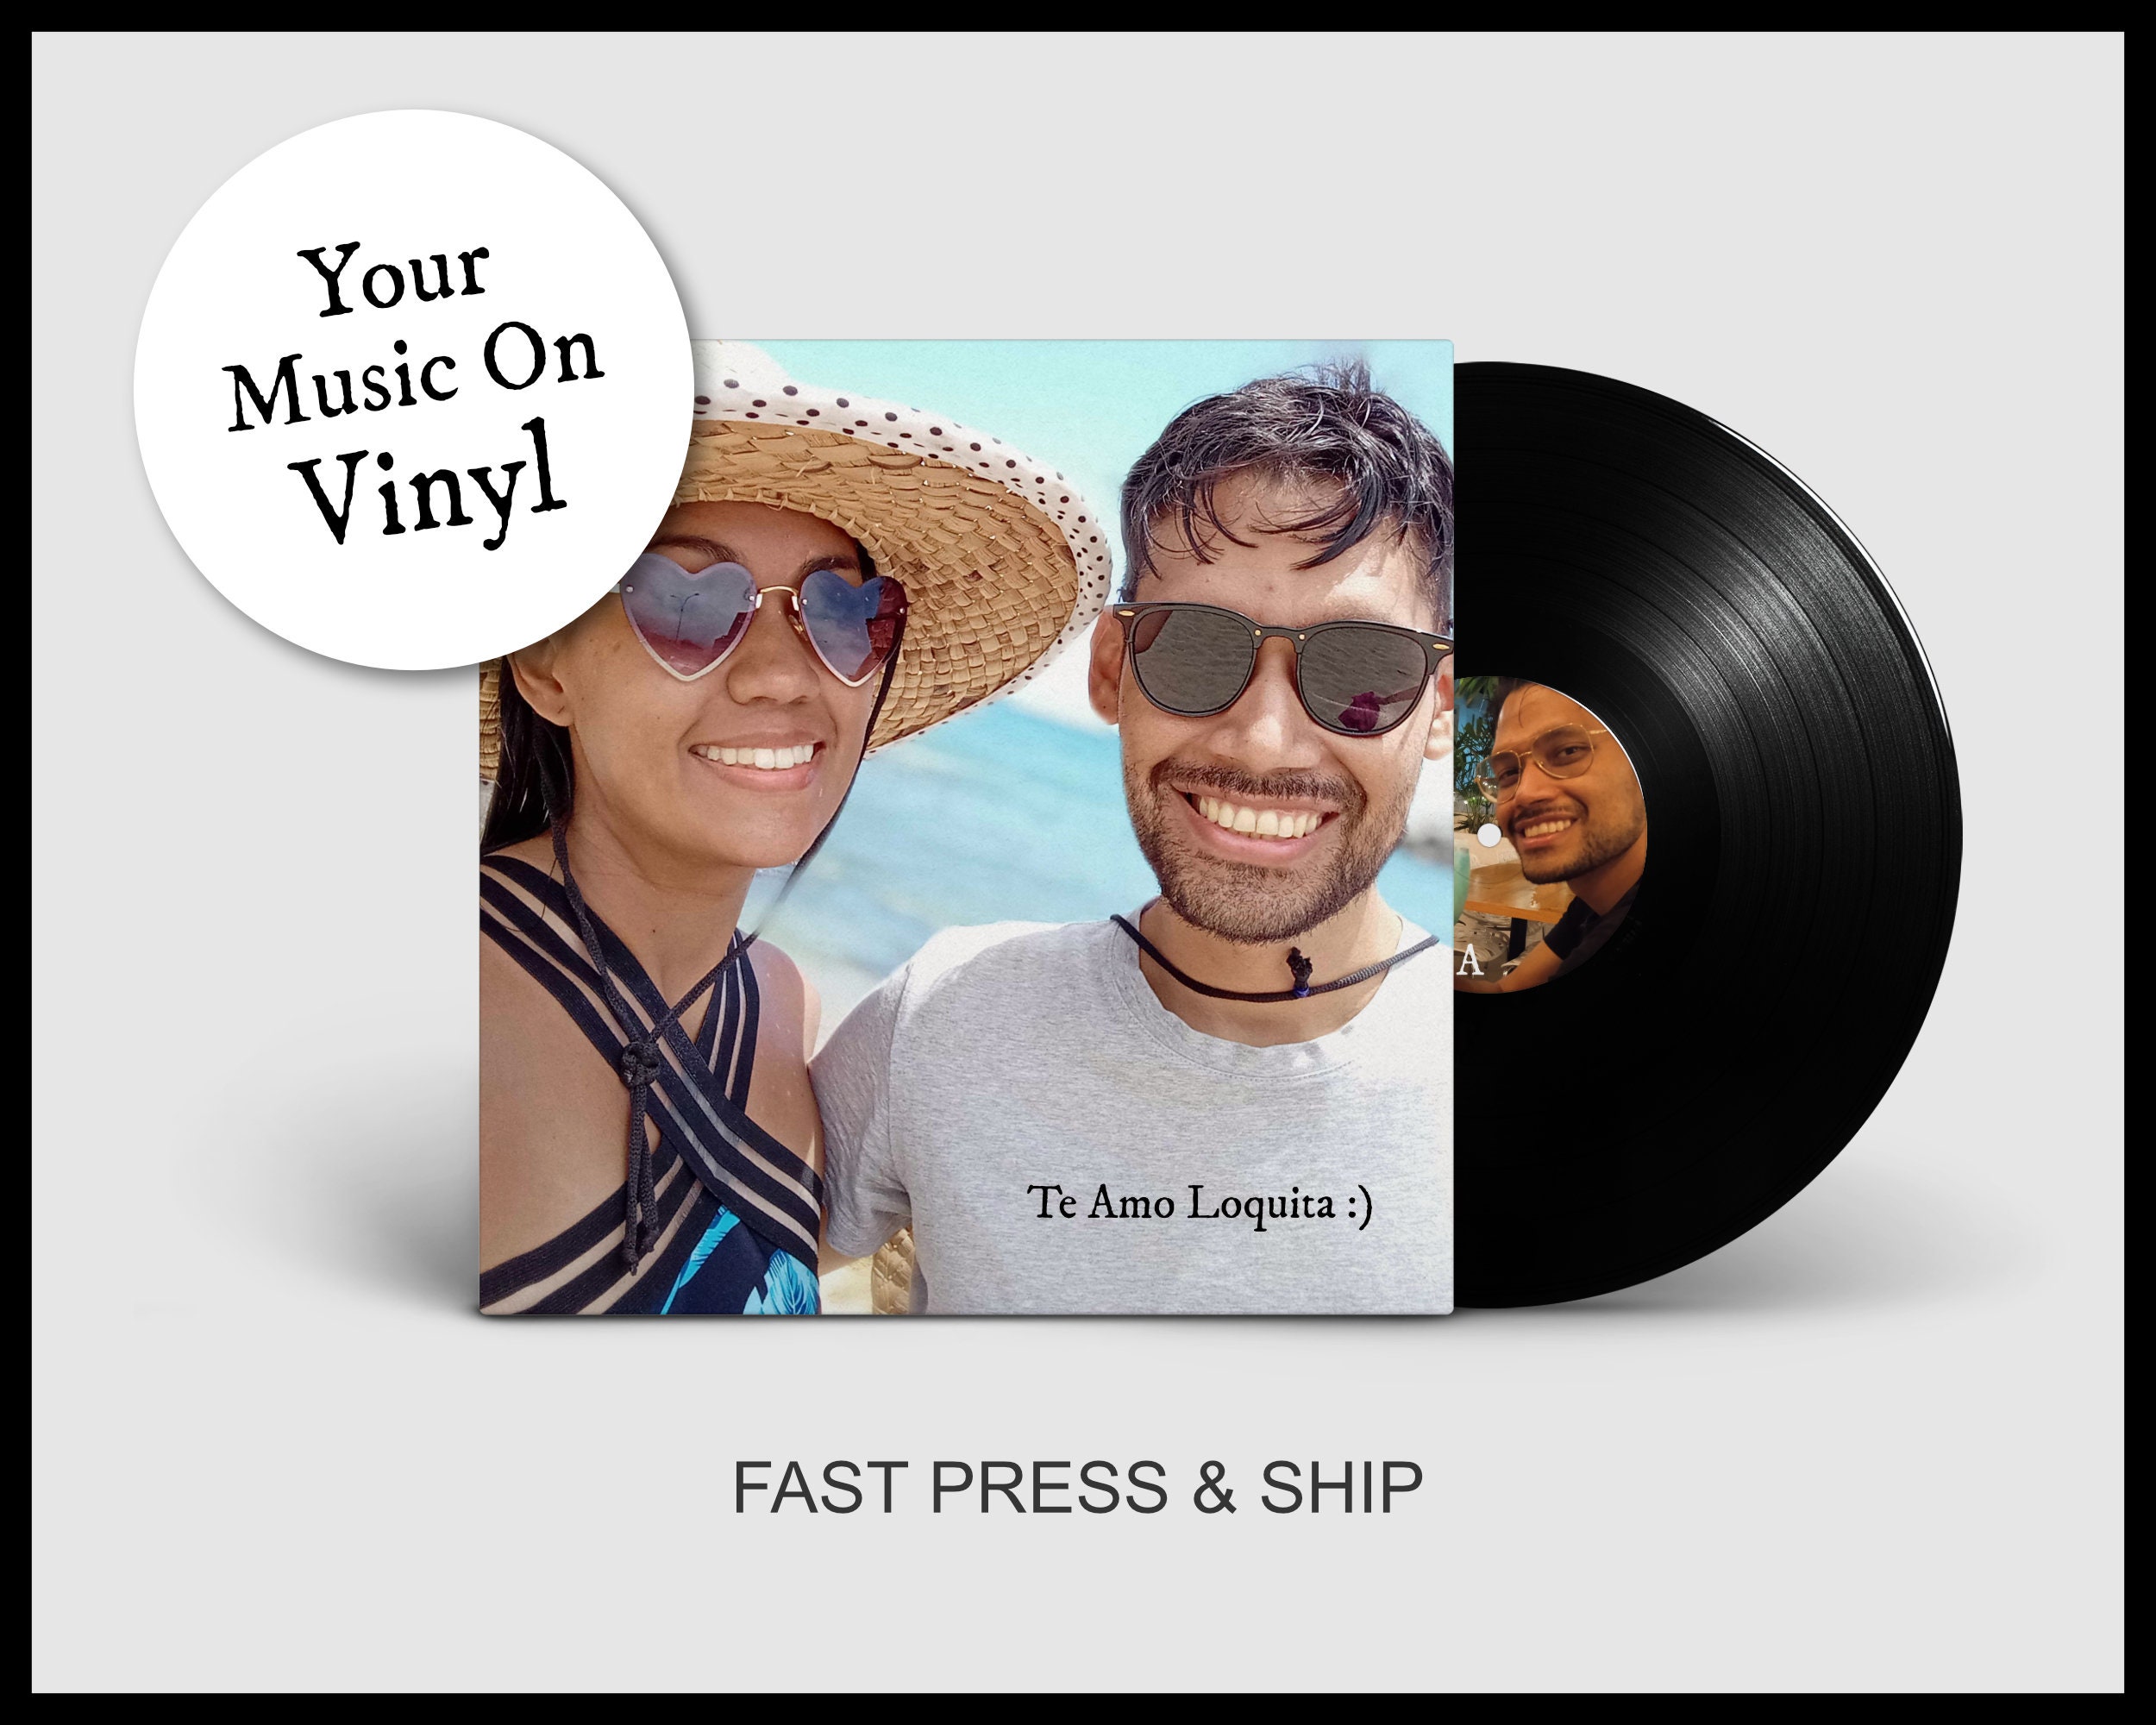 Custom Vinyl Record With Mixtape & Pictures on - Etsy